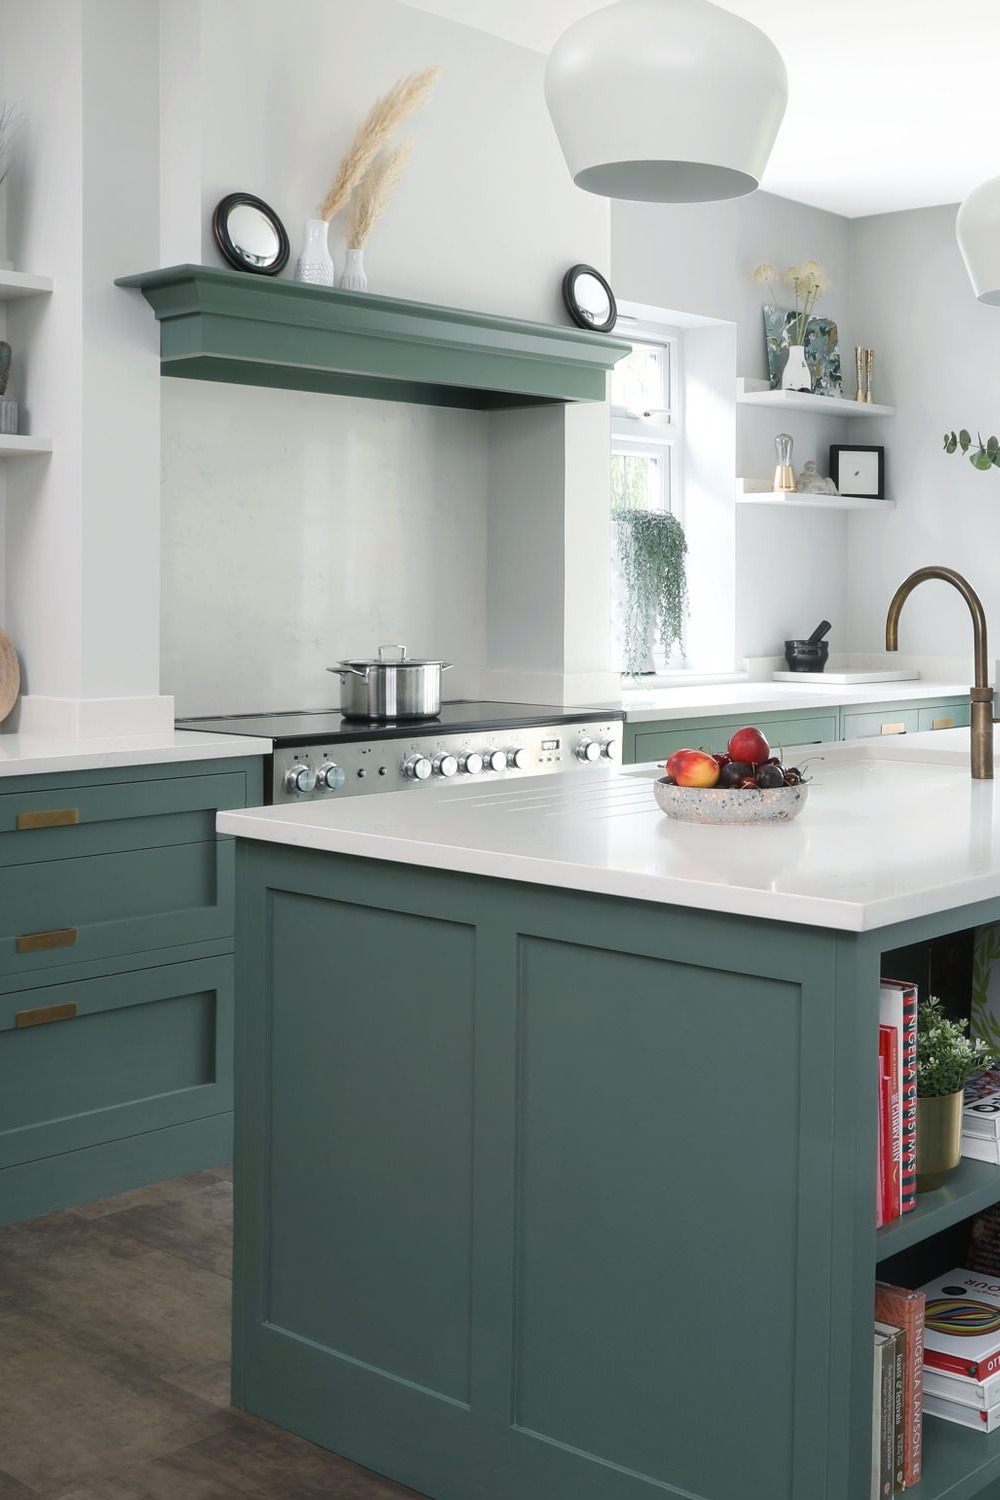 Contemporary Hand Painted Green Cabinets Save Kitchen Space Regular Price Add